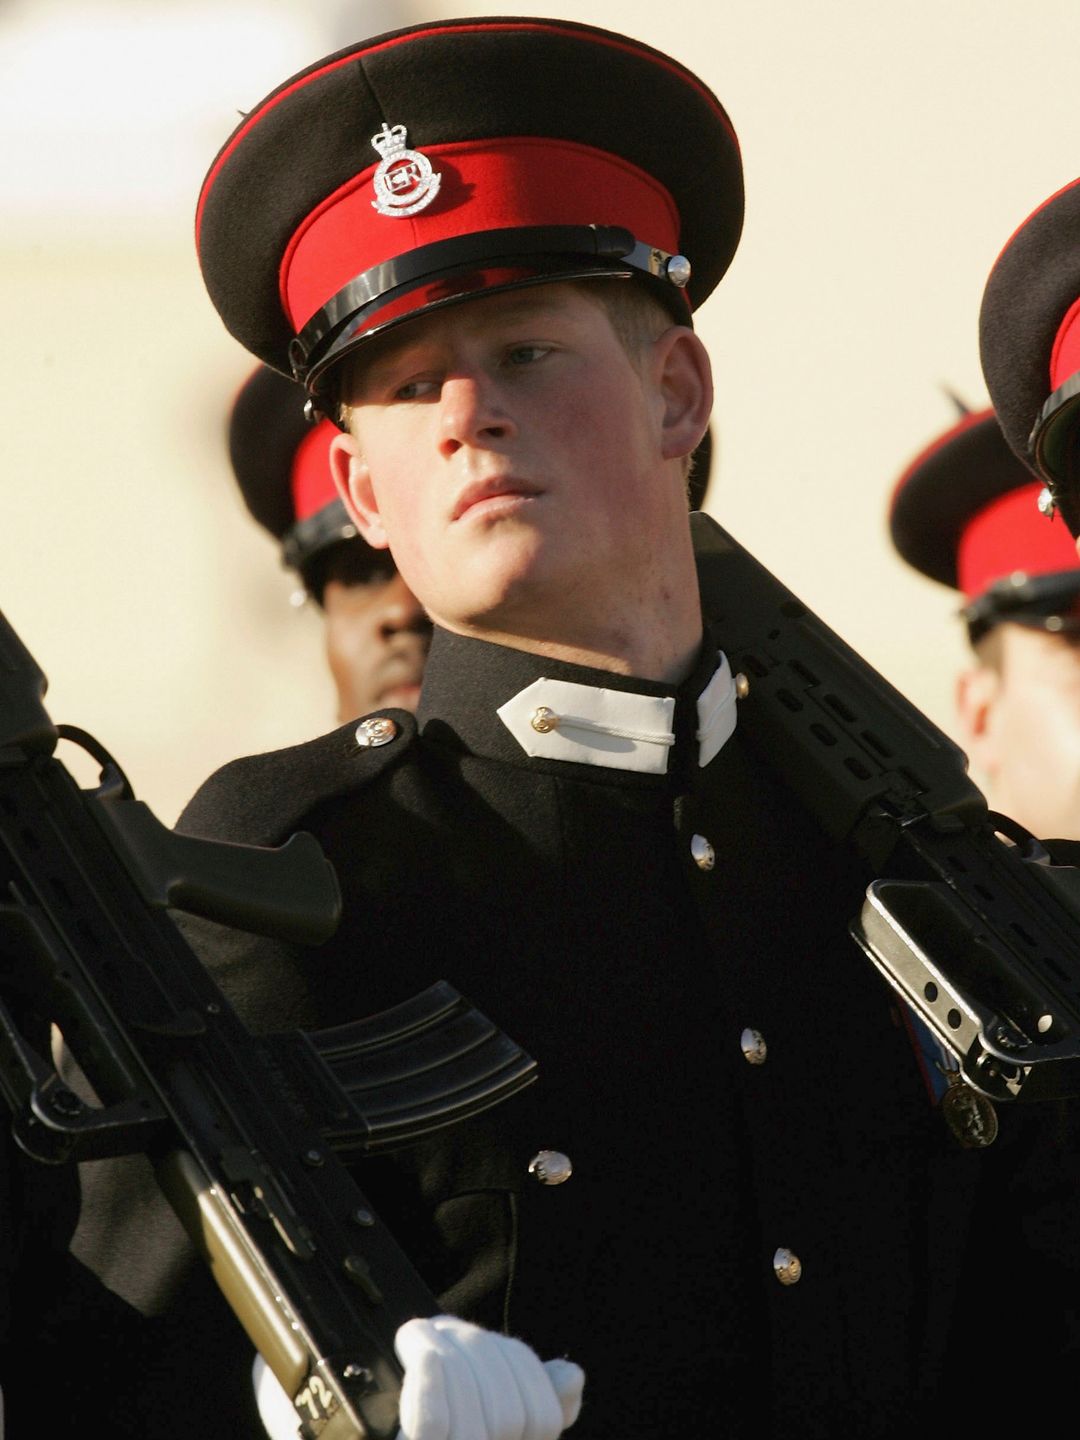 Prince Harry takes part in his first Sovereign's Parade at the Royal Military Academy on December 16, 2005 in Sandhurst